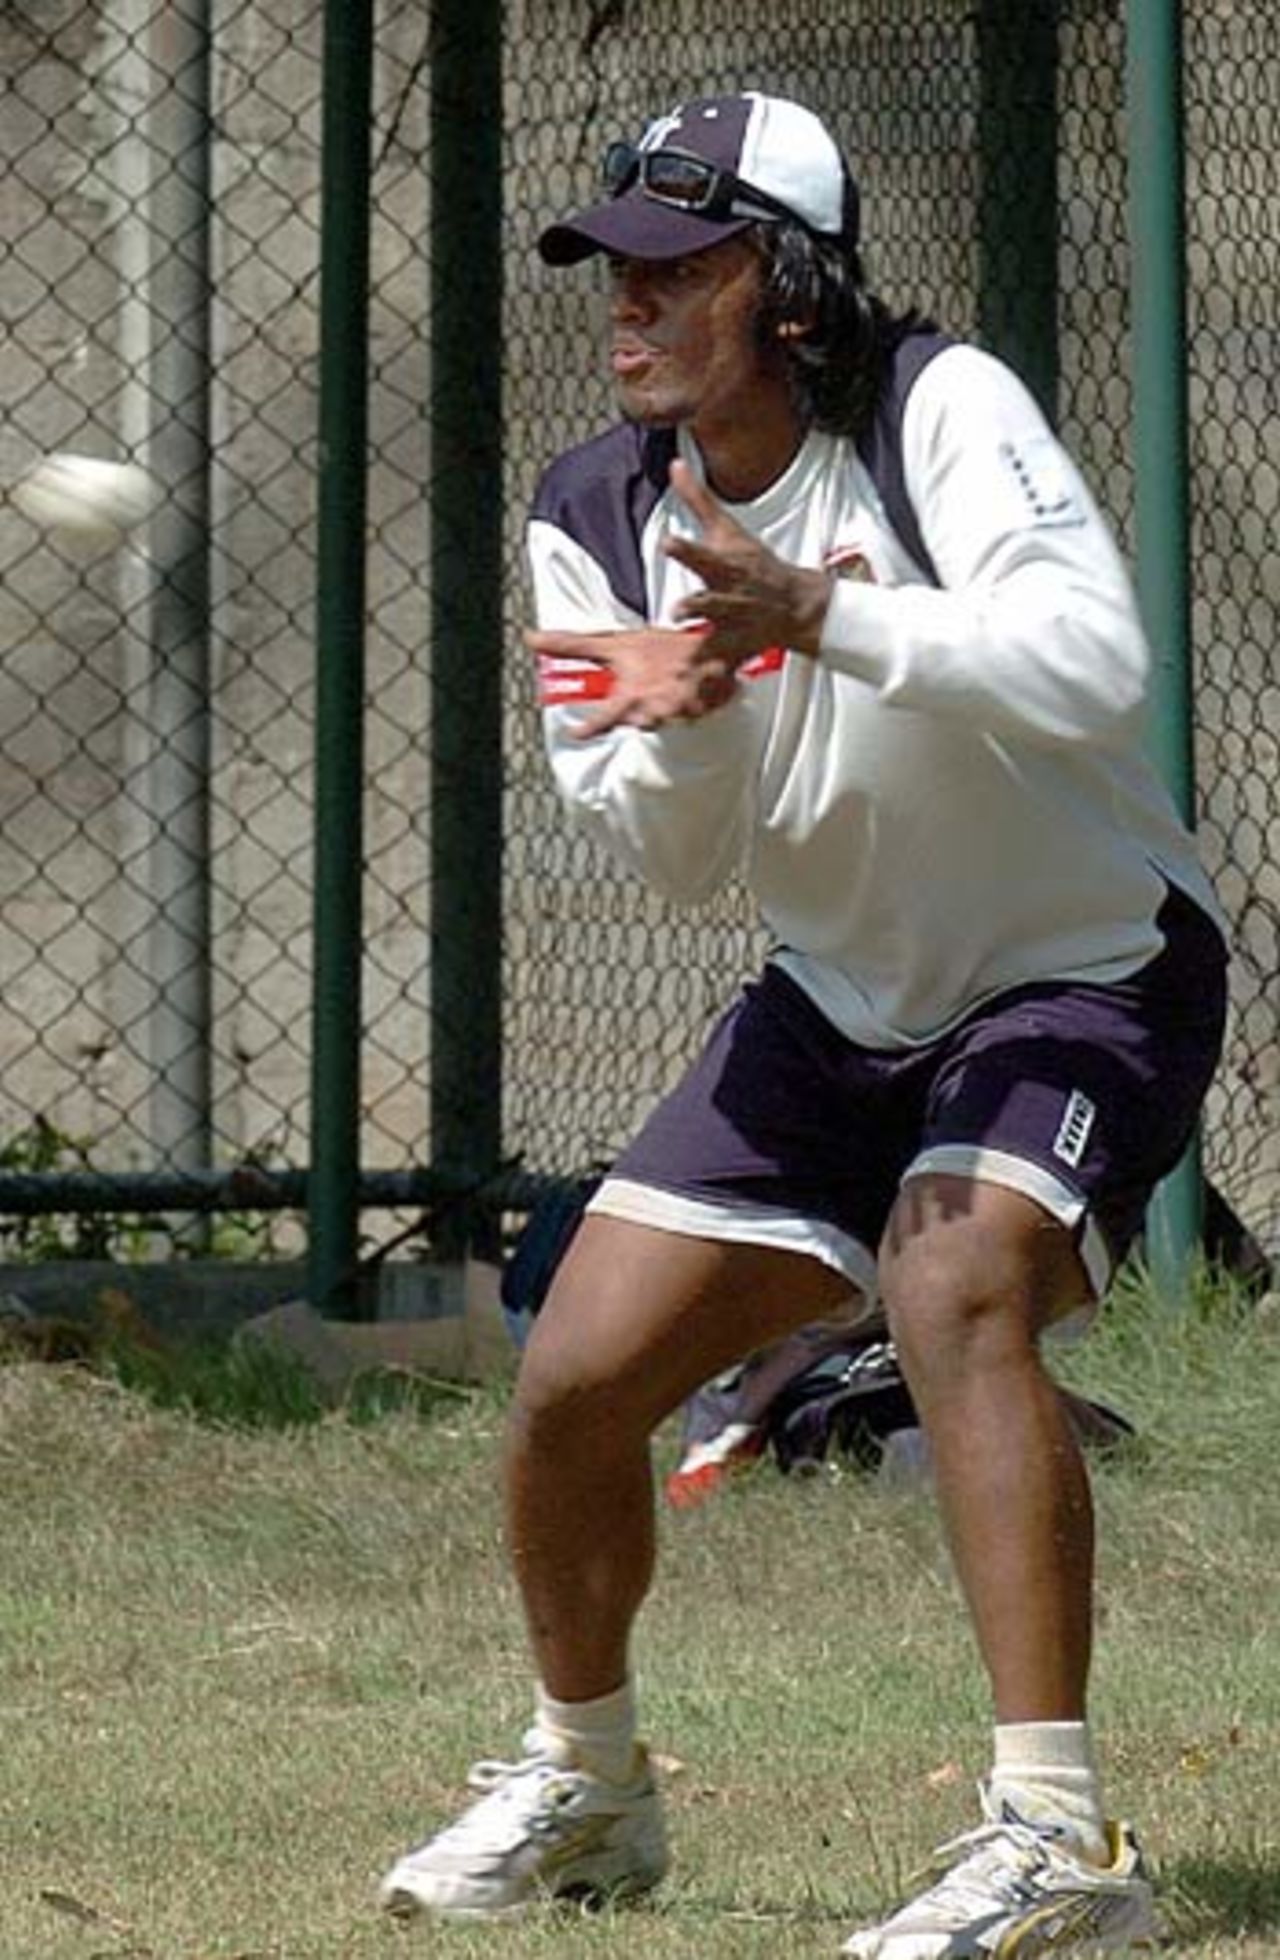 Shahriar Nafees takes a catch in practice, Colombo, August 27, 2005